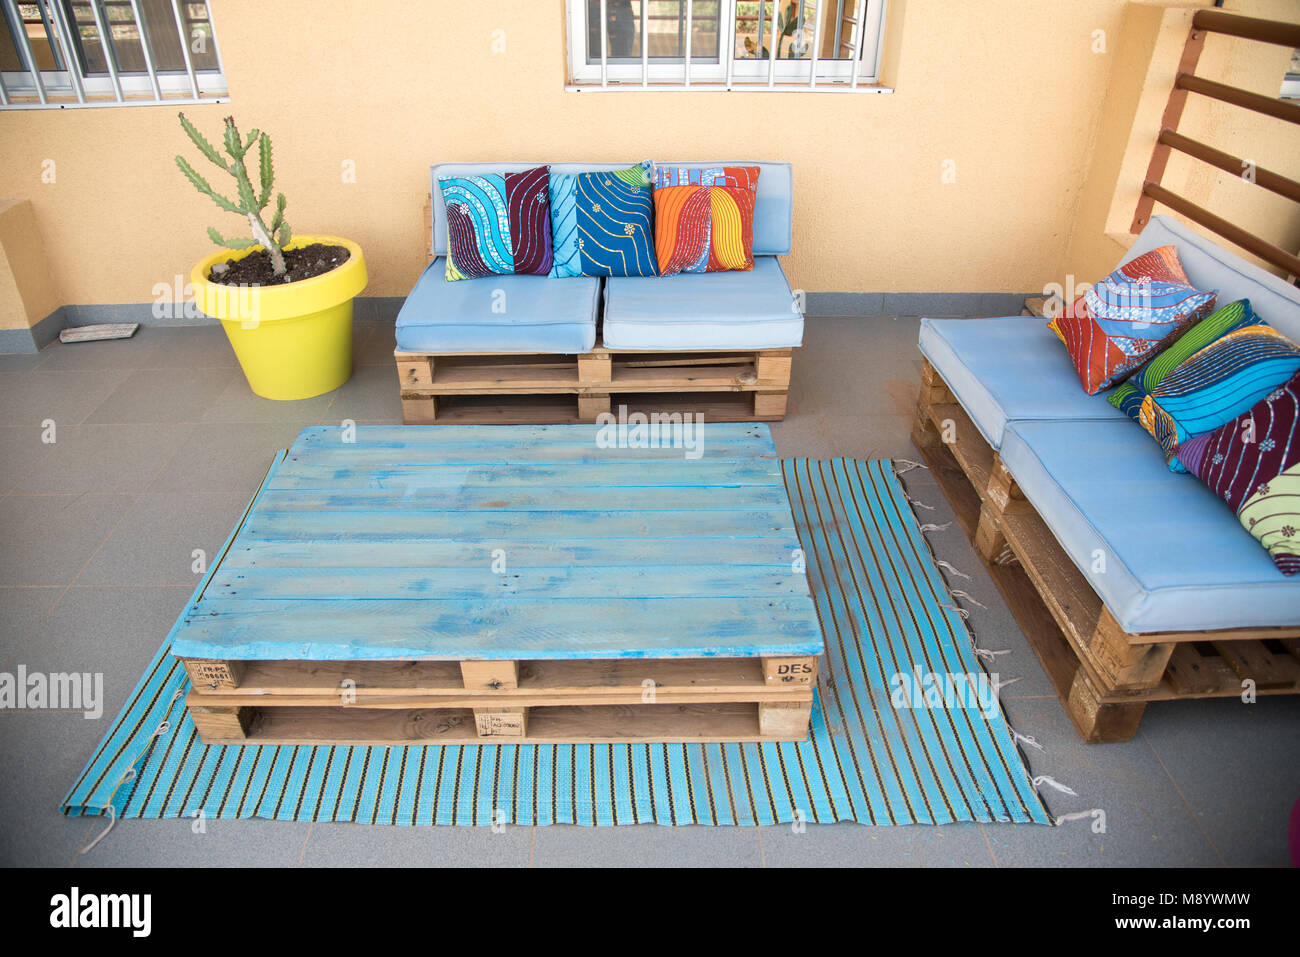 Cool Patio Furniture Made From Wooden Pallets Painted Blue With